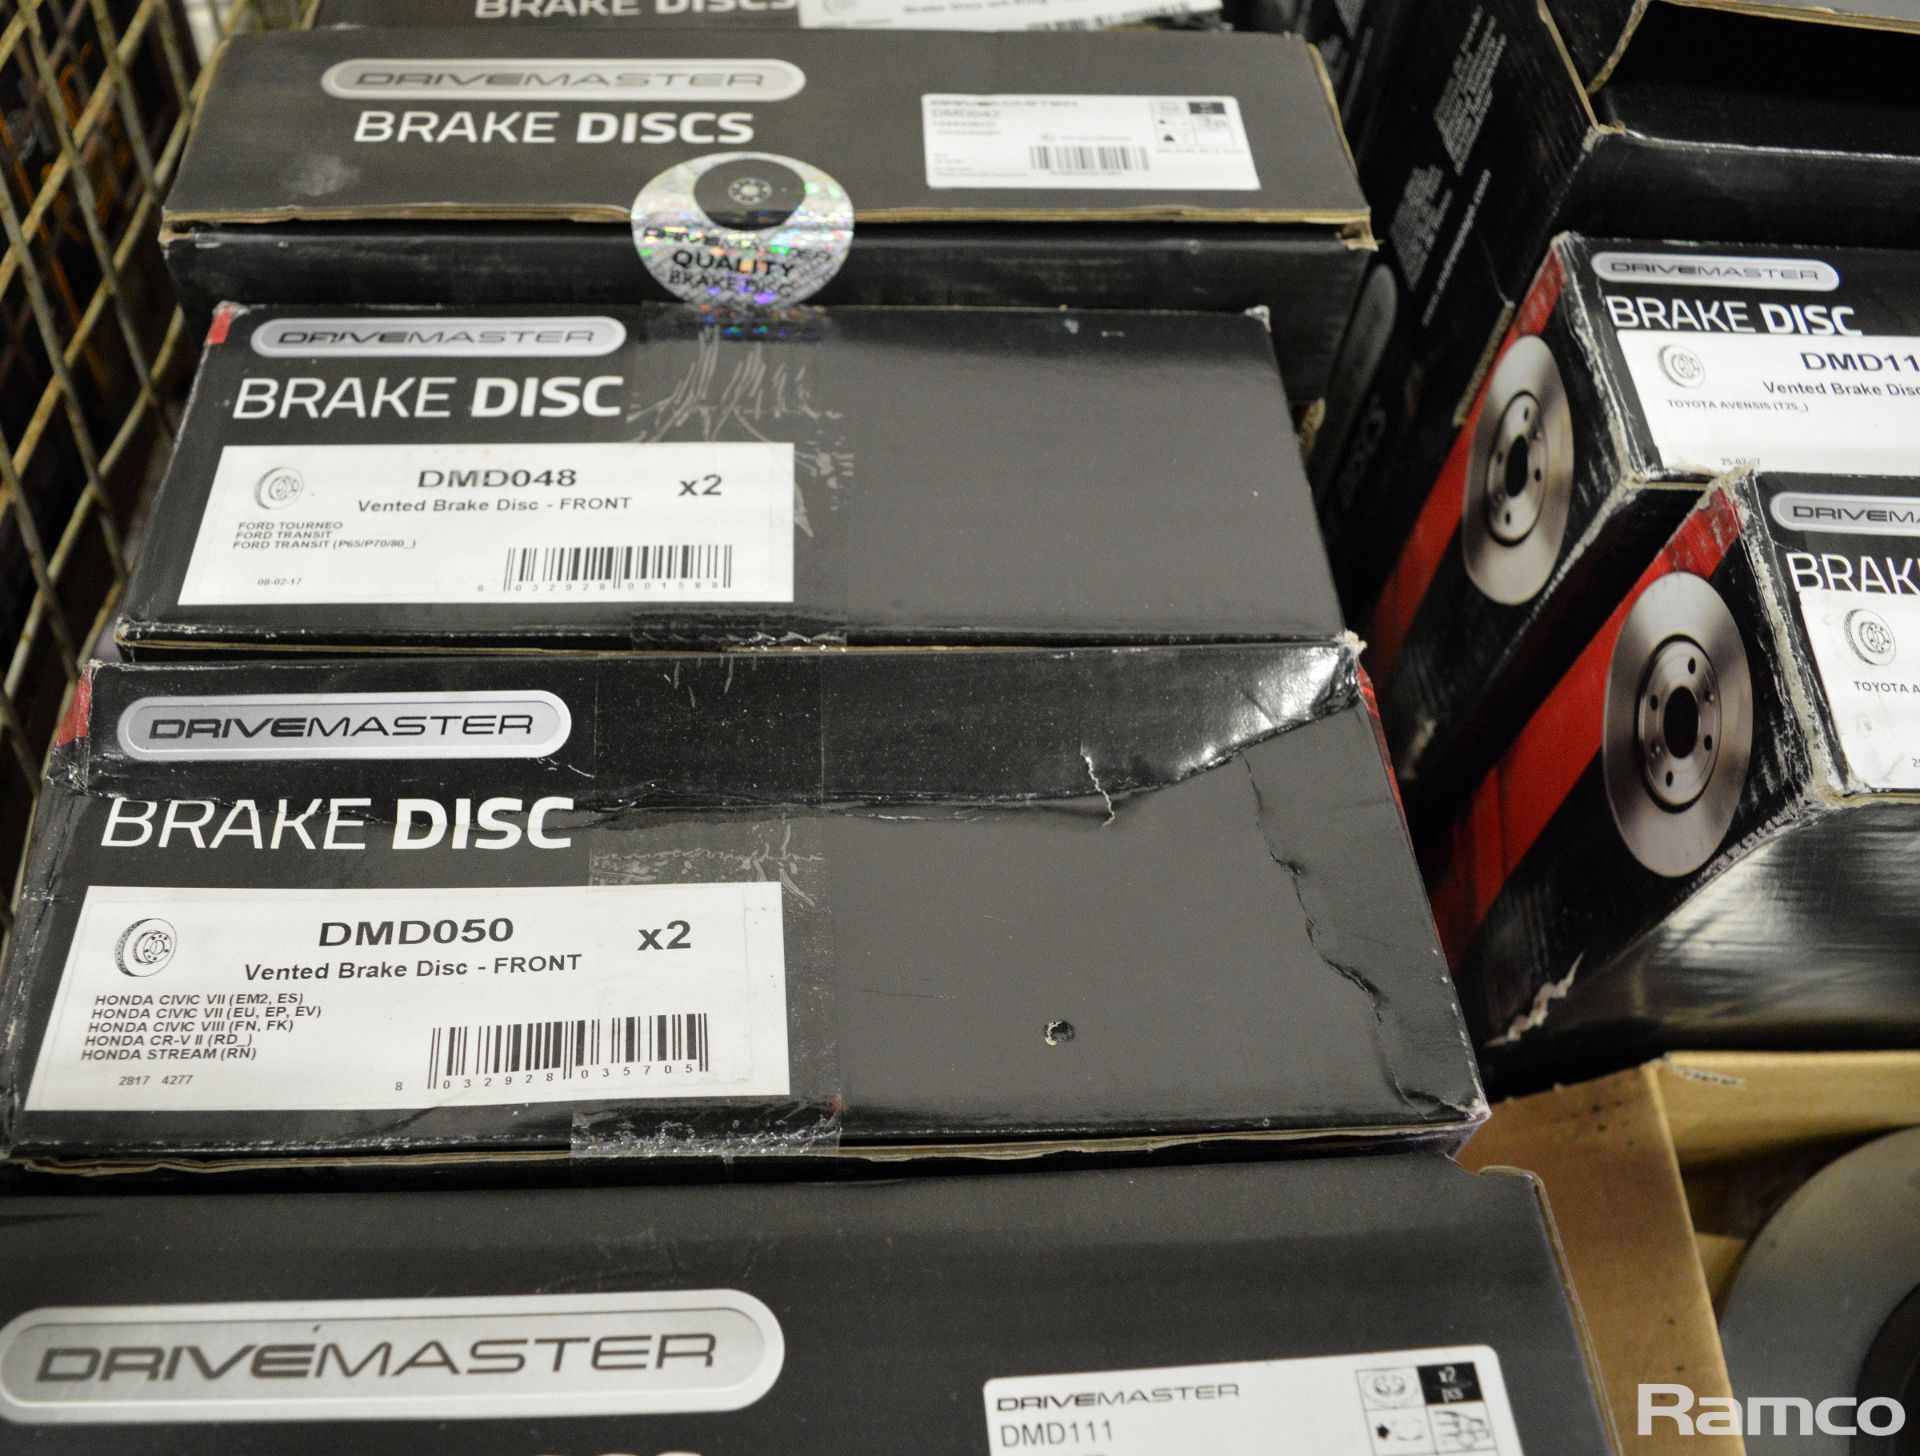 Drivemaster, Eicher, Pagid brake discs - see pictures for model / type - Image 5 of 8